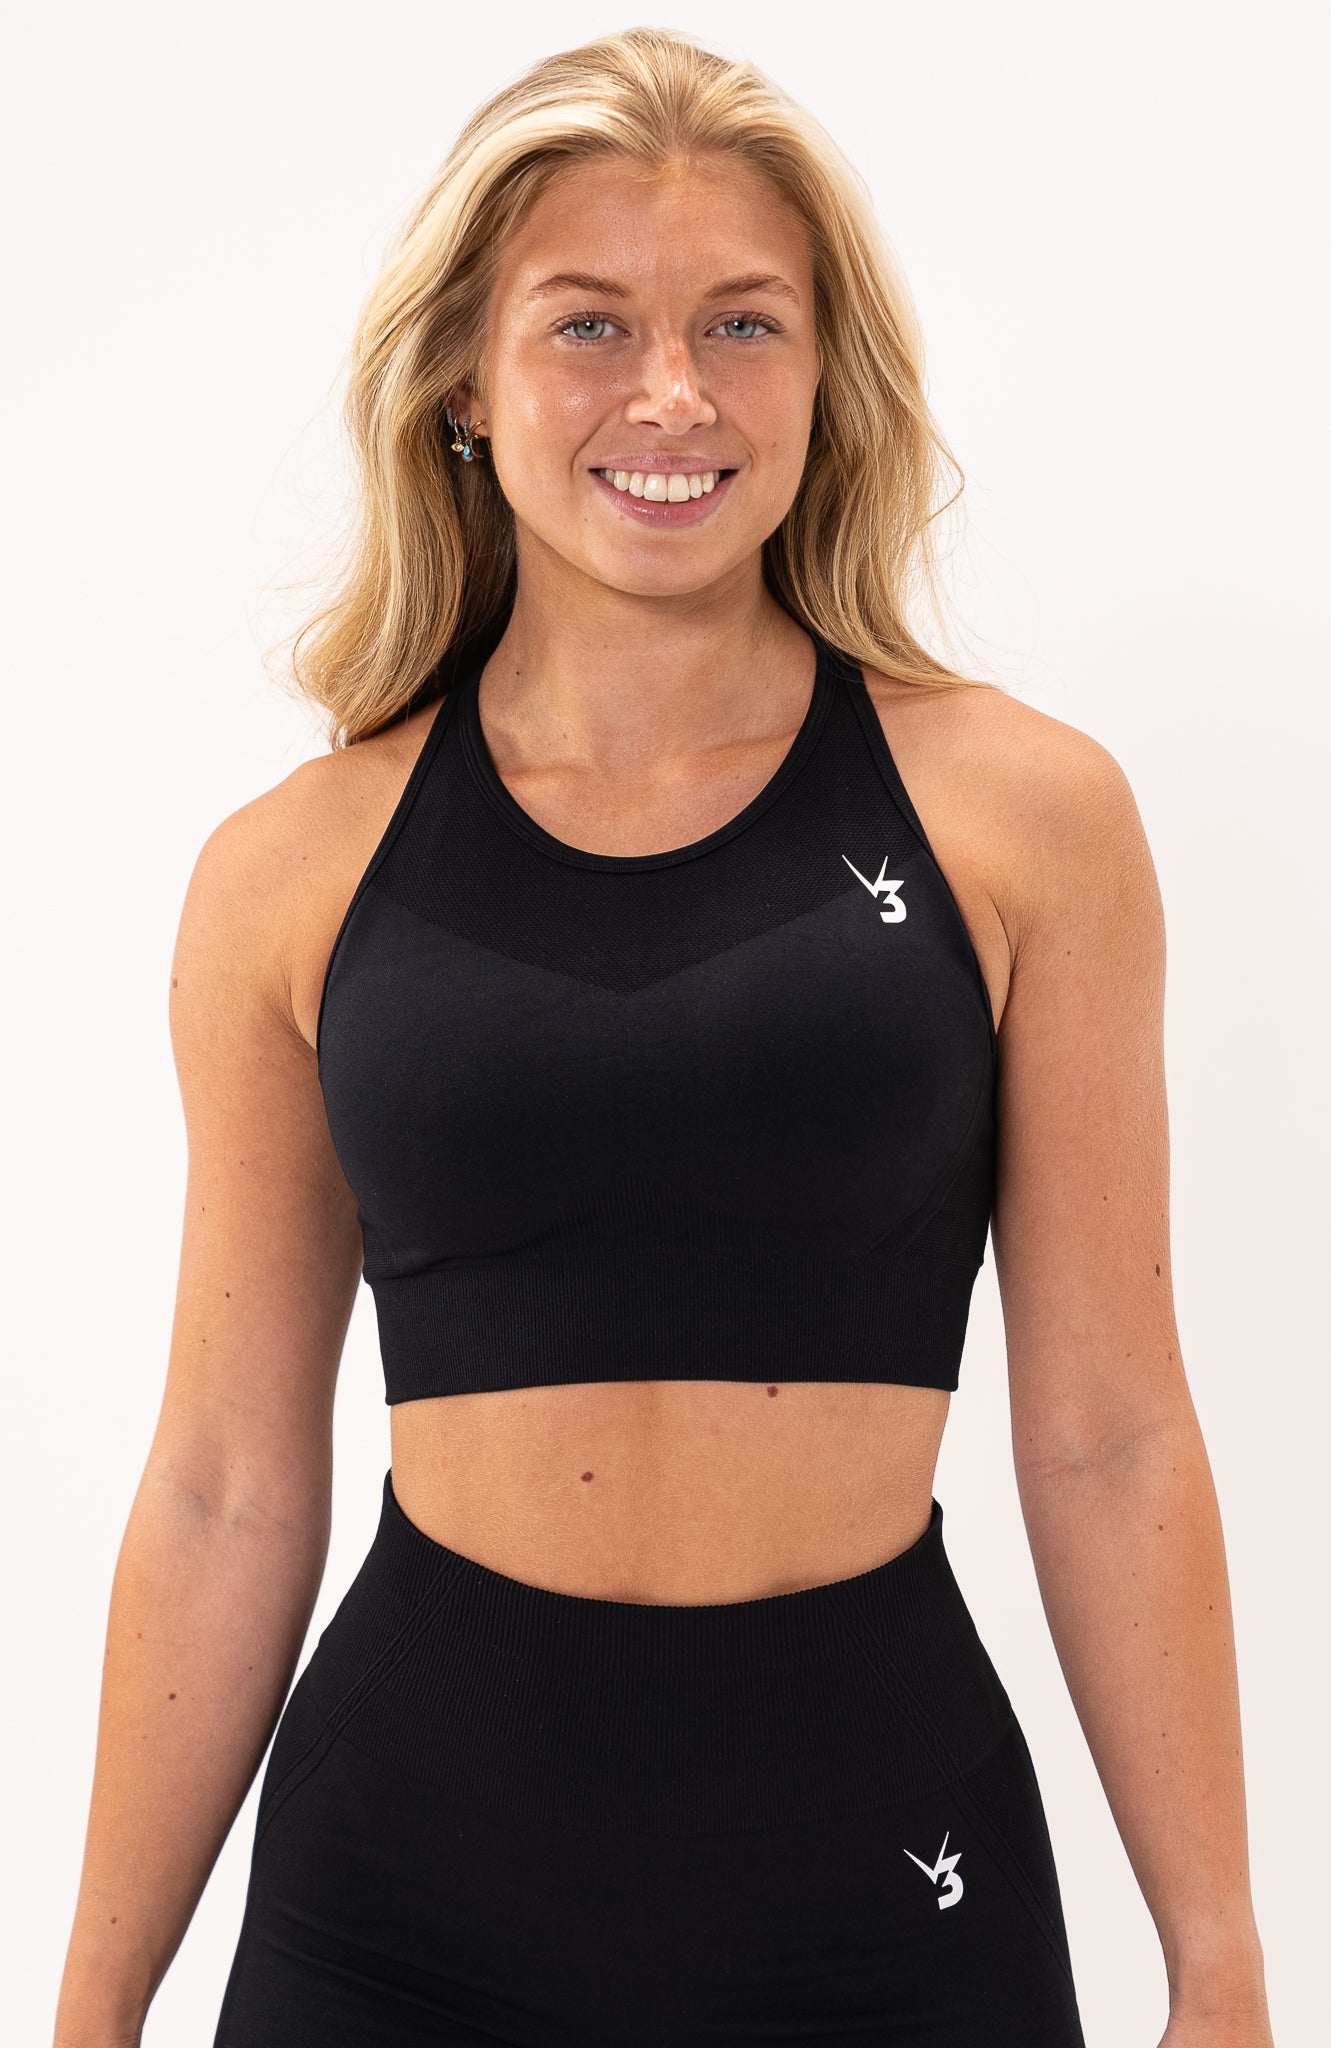 redbaysand Women's Tempo seamless training sports bra in black with removable padded cups and straps for gym workouts training, Running, yoga, bodybuilding and bikini fitness.